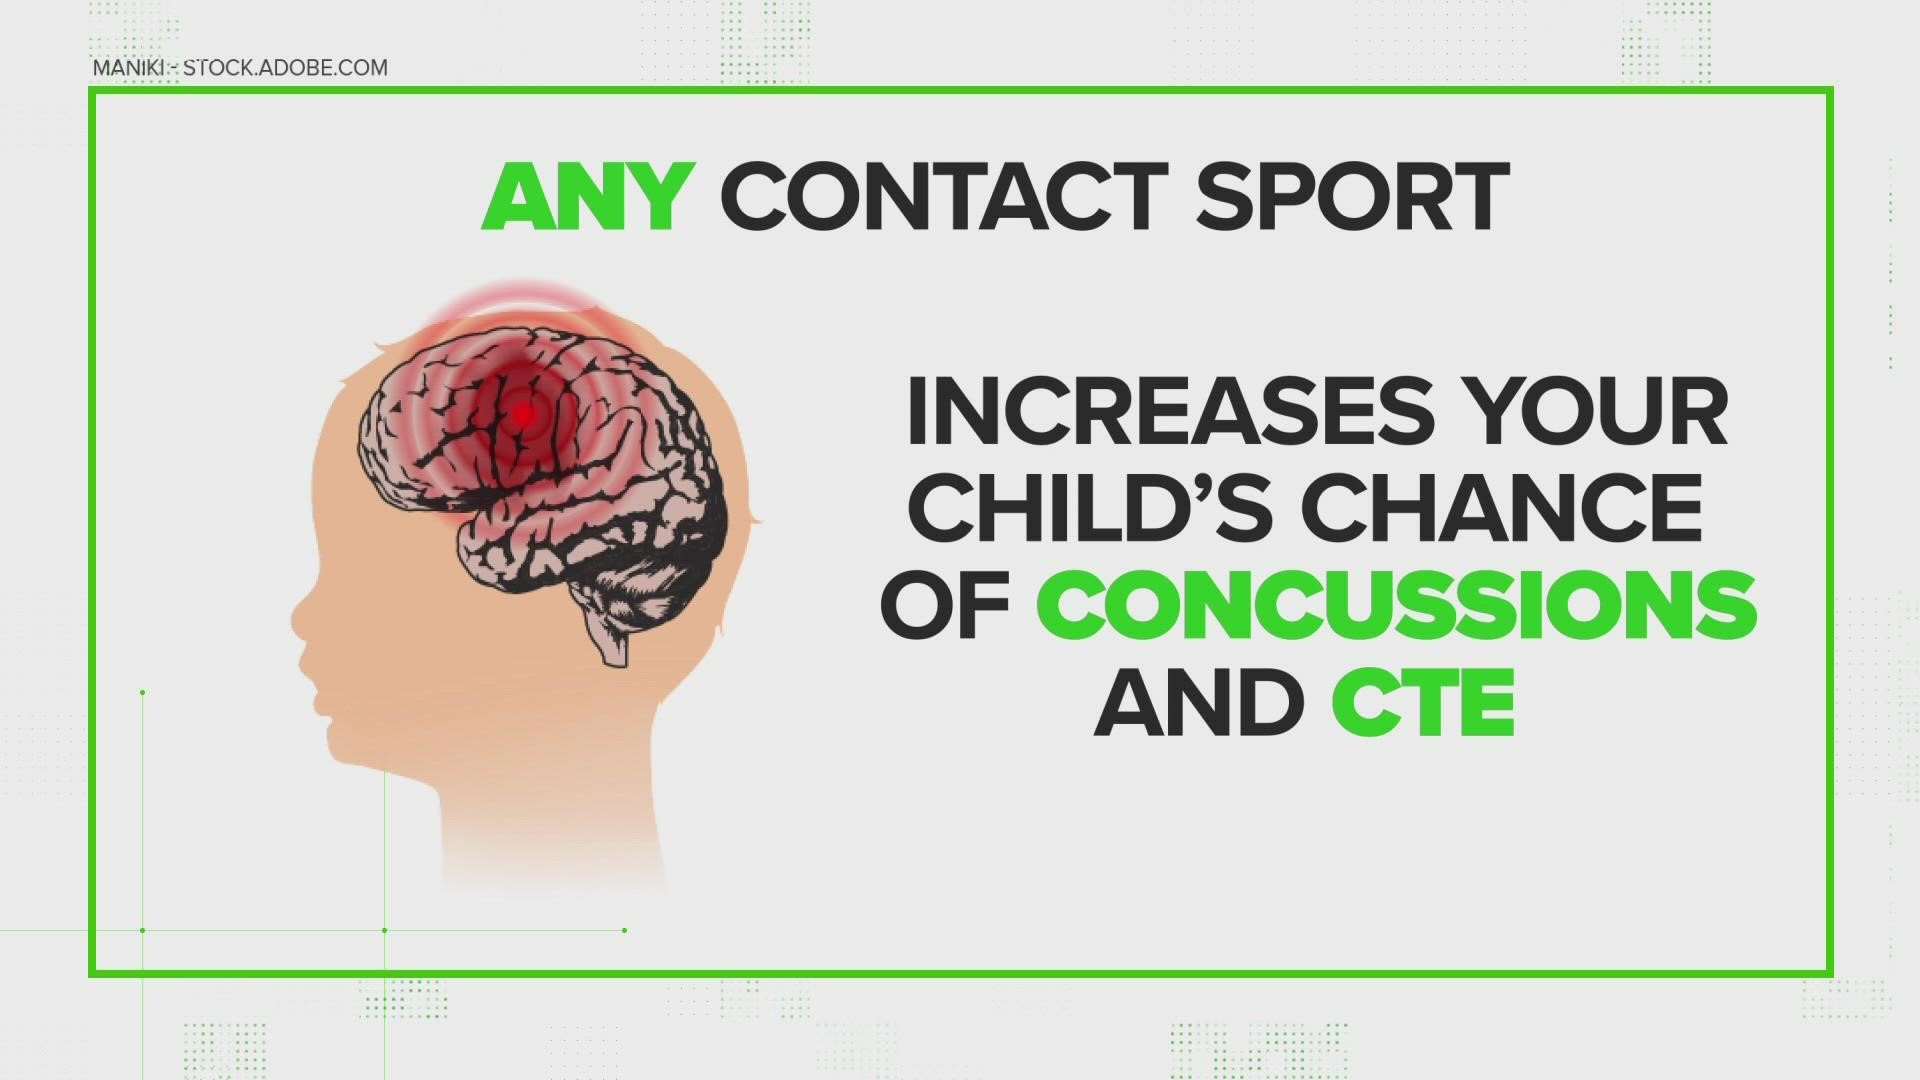 A new Public Service Announcement (PSA) calls for children under the age of 14, to avoid playing tackle football.